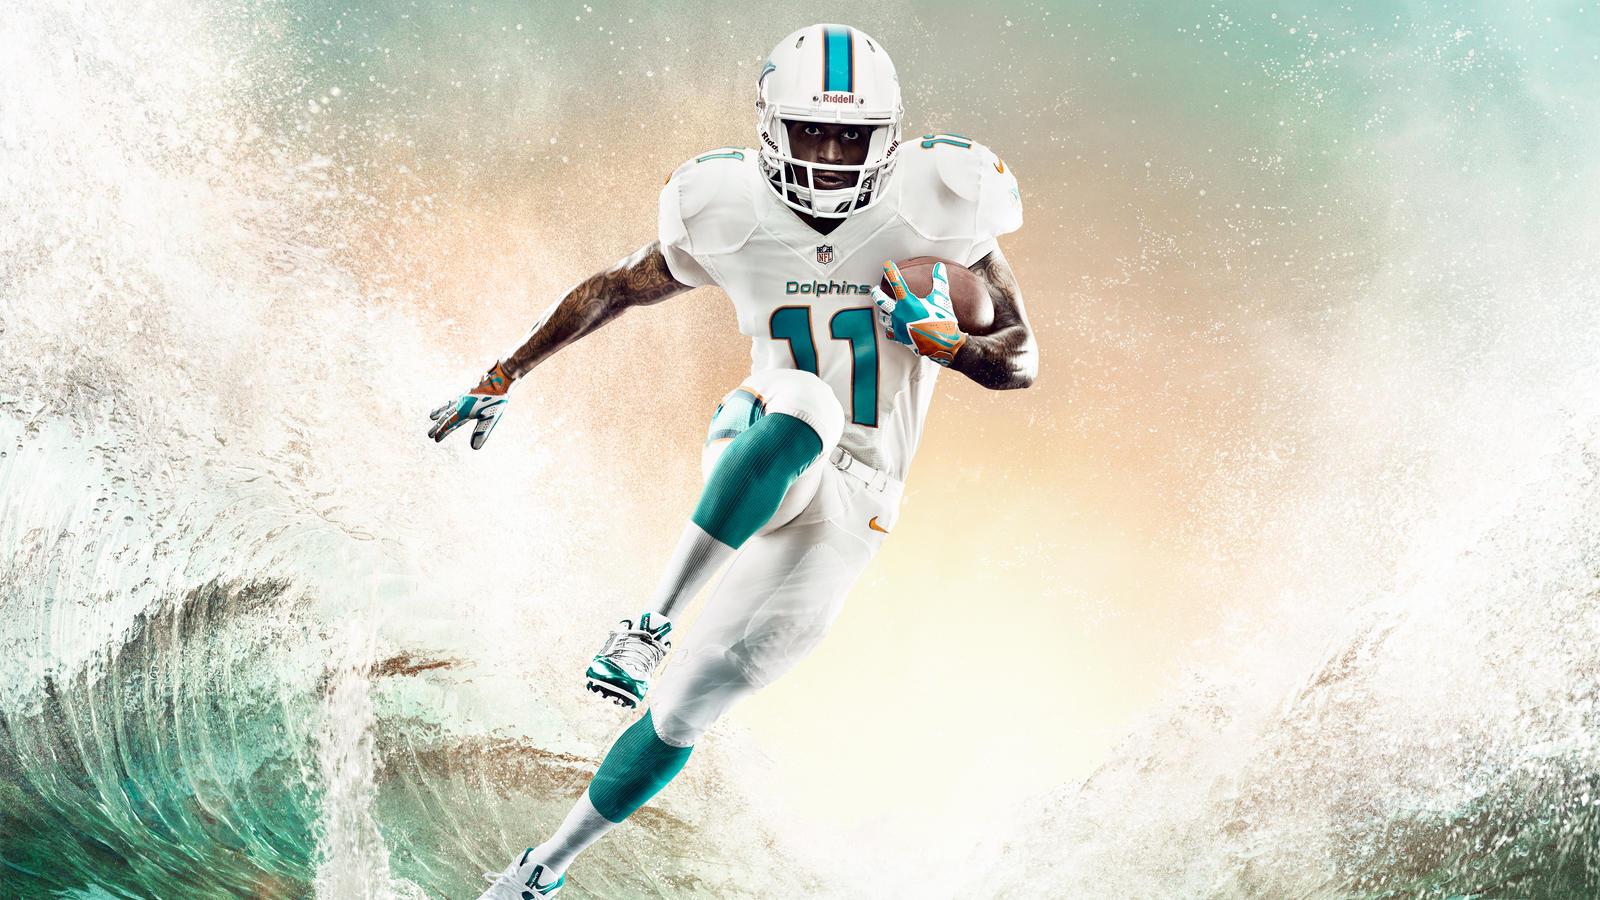 Miami Dolphins NFL Wallpapers - Wallpaper Cave